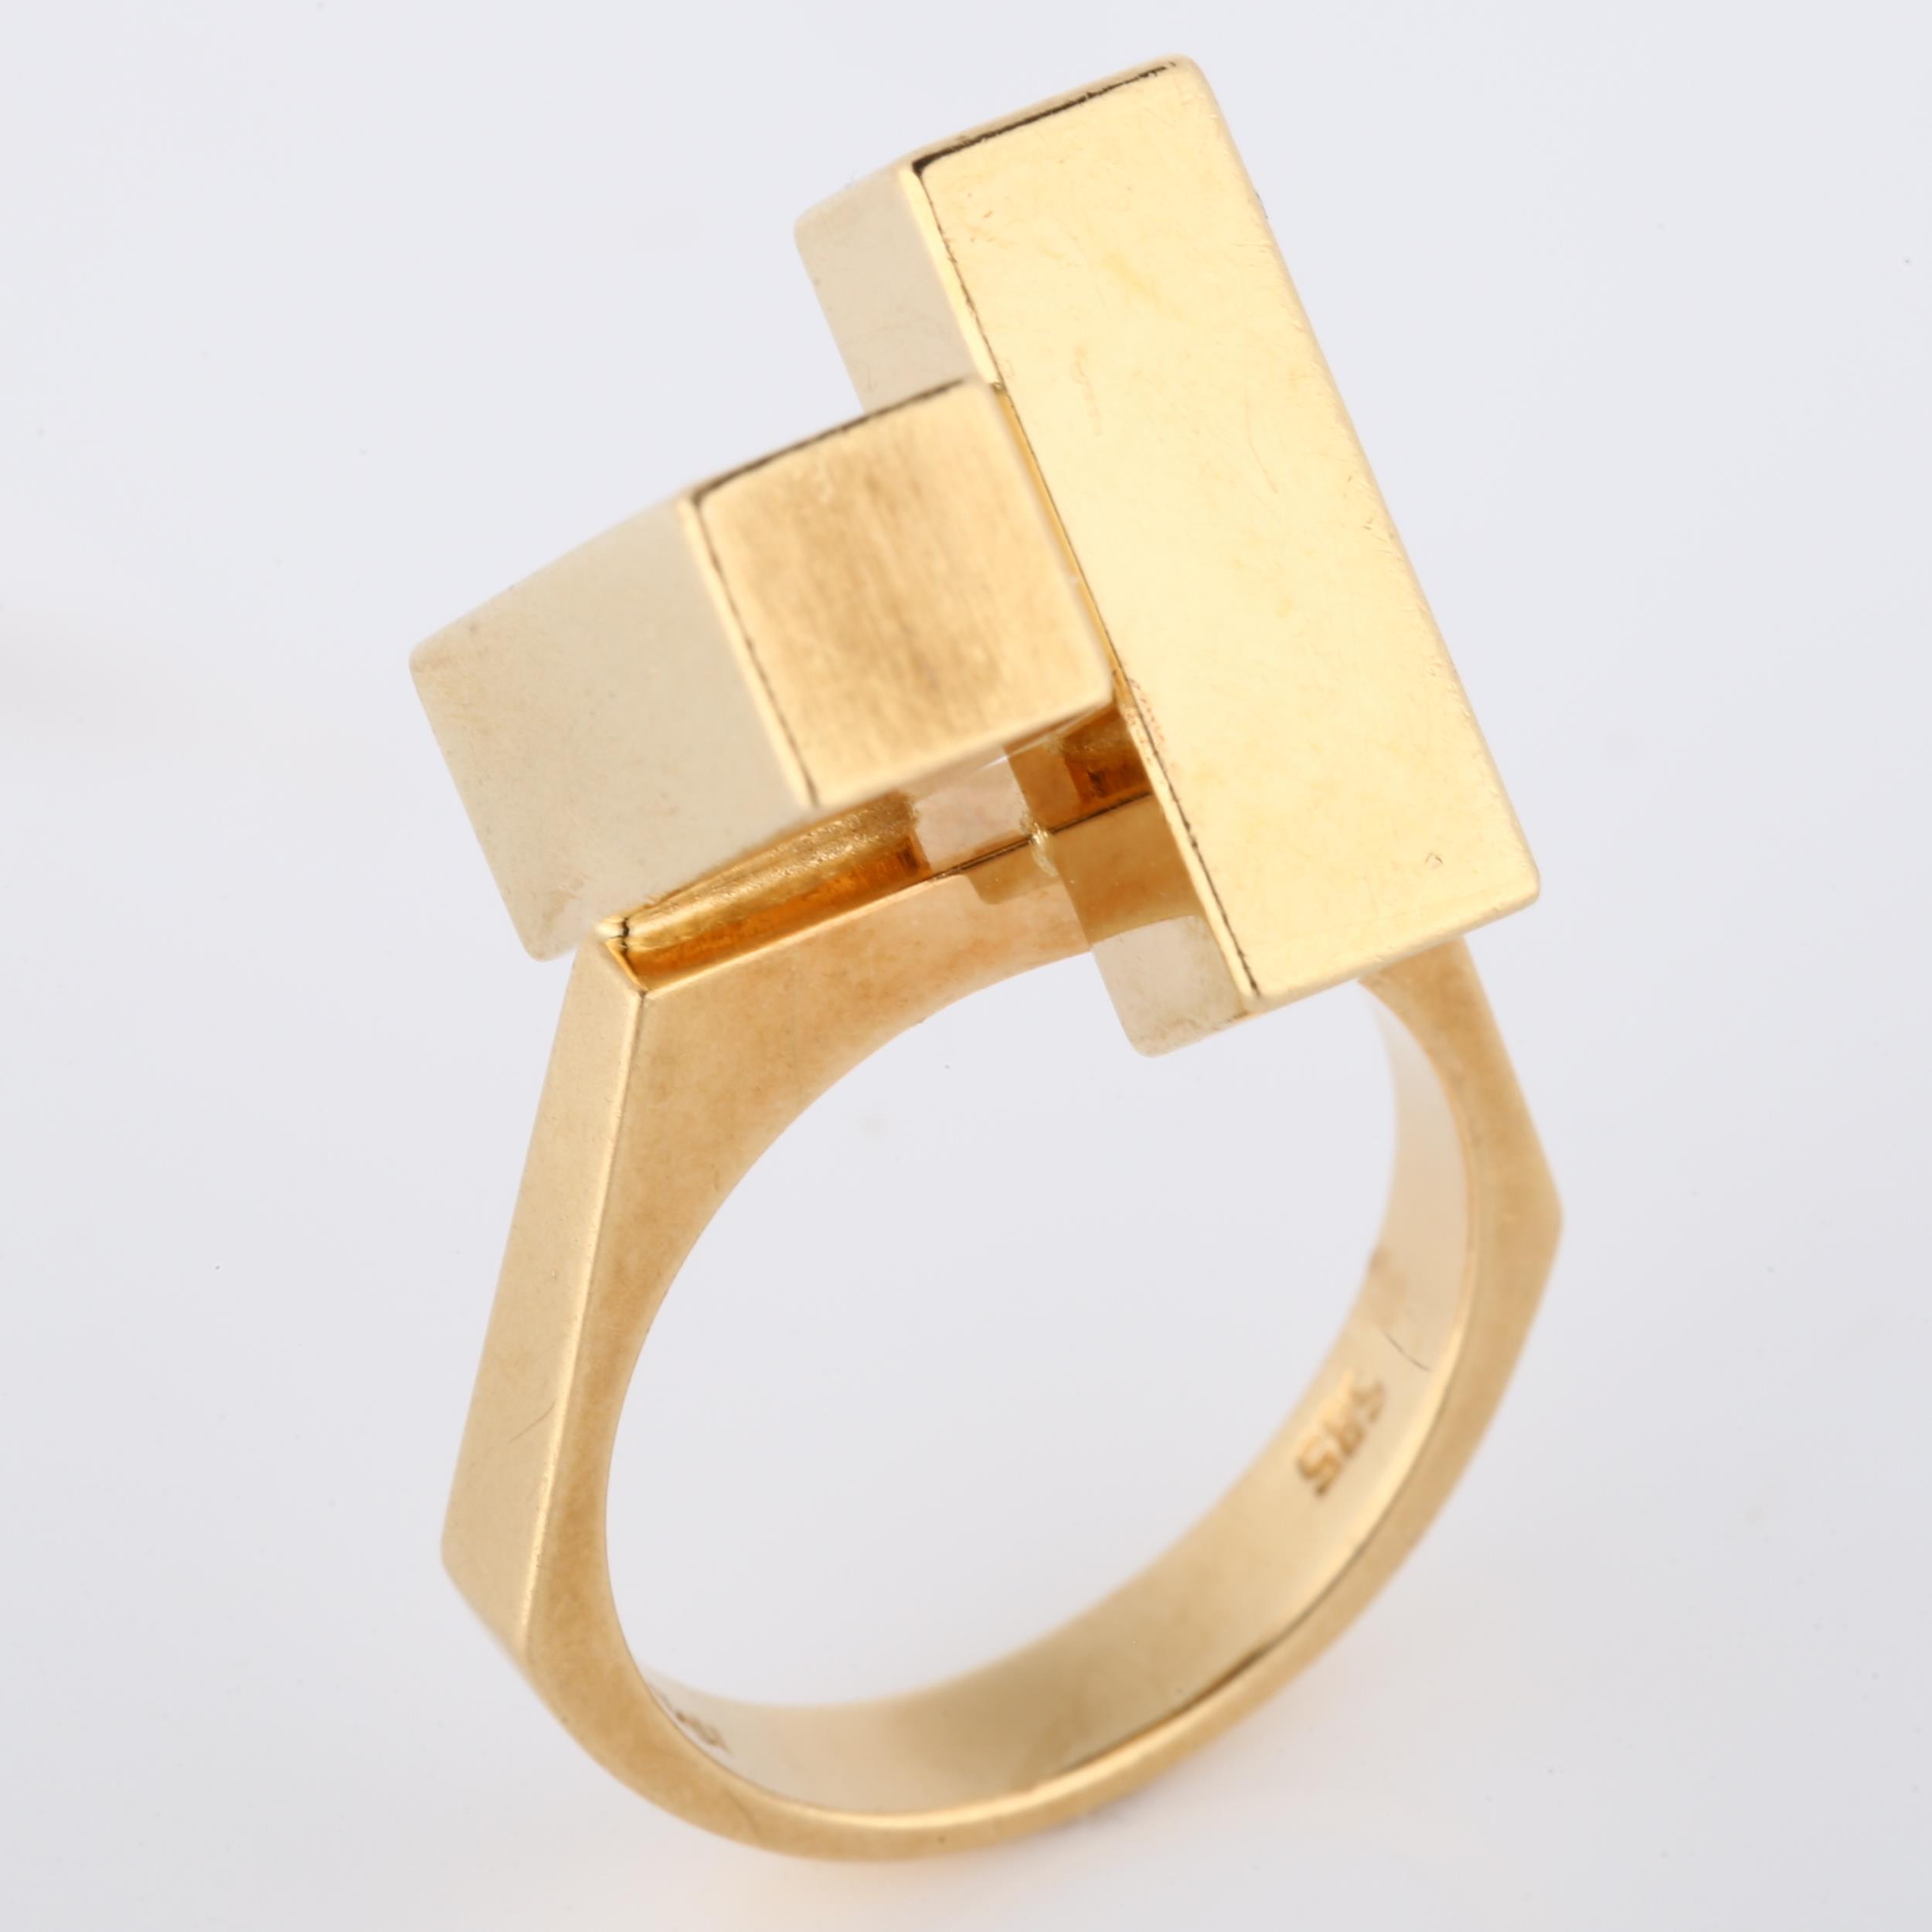 HANS HANSEN - a 1970s Danish 14ct gold geometric abstract ring, set with 2 offset cuboid blocks, - Image 2 of 4